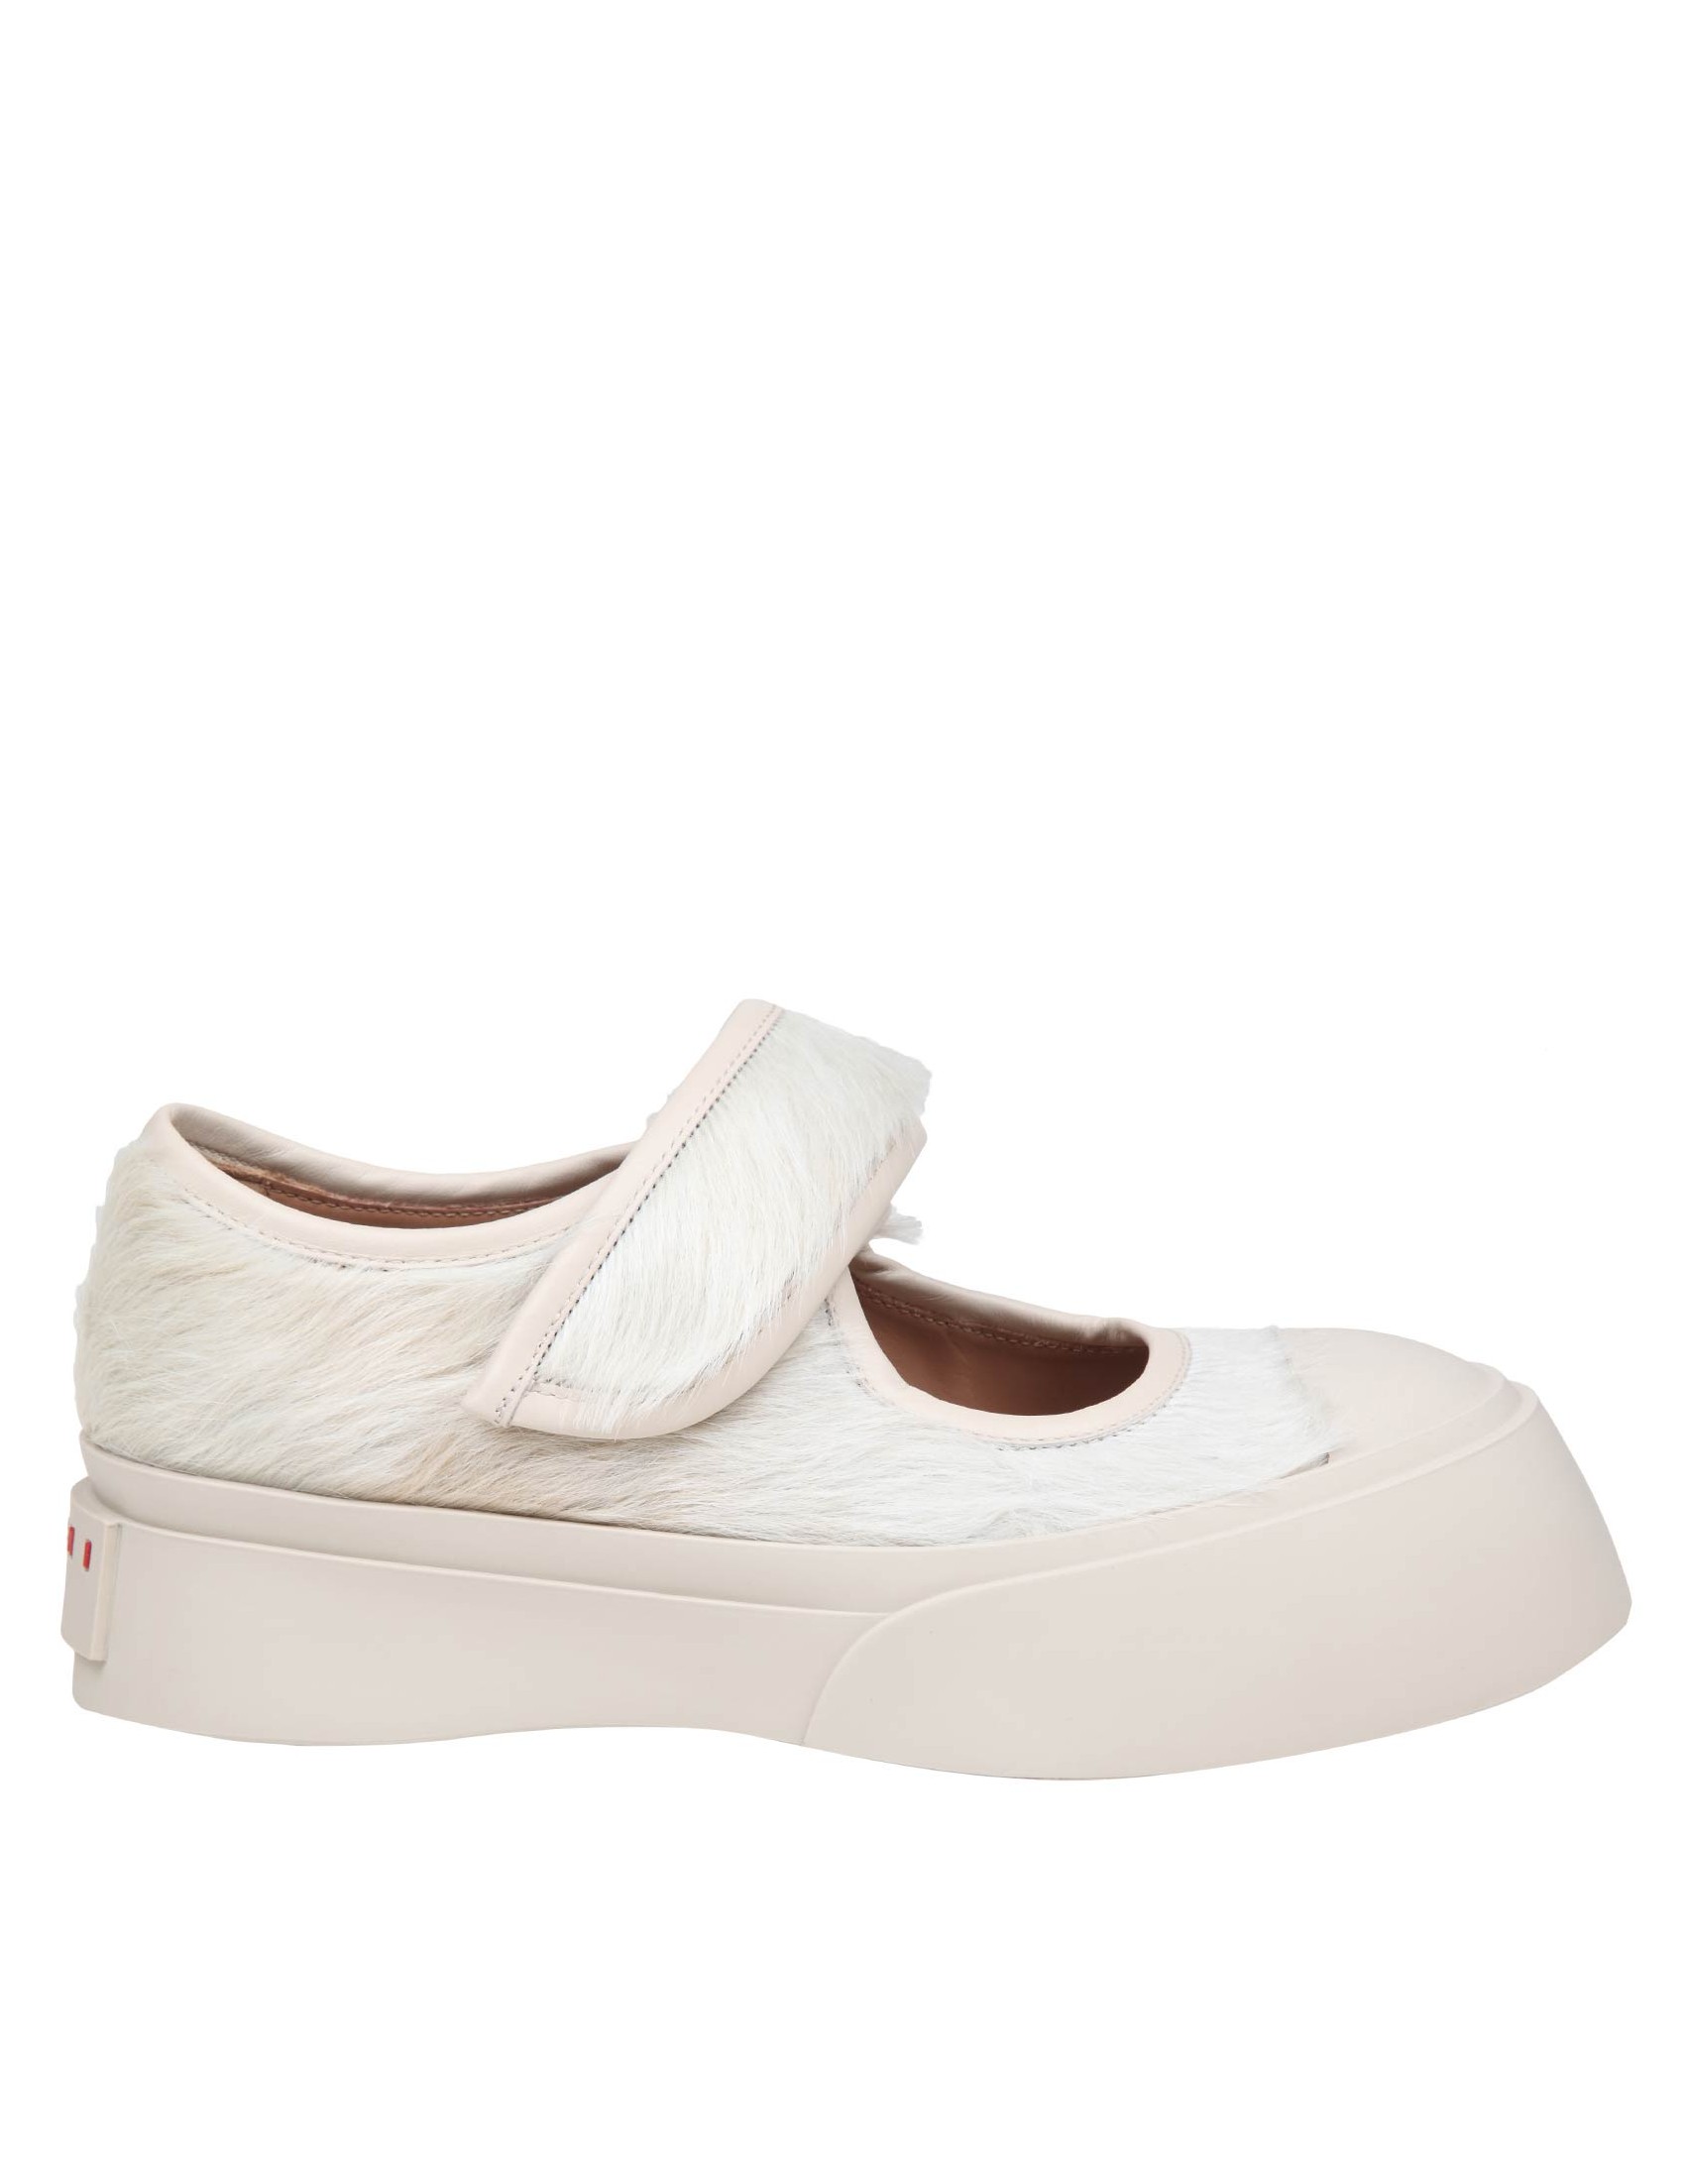 MARNI MARY JANES SNEAKERS IN LONG-HAIRED LEATHER